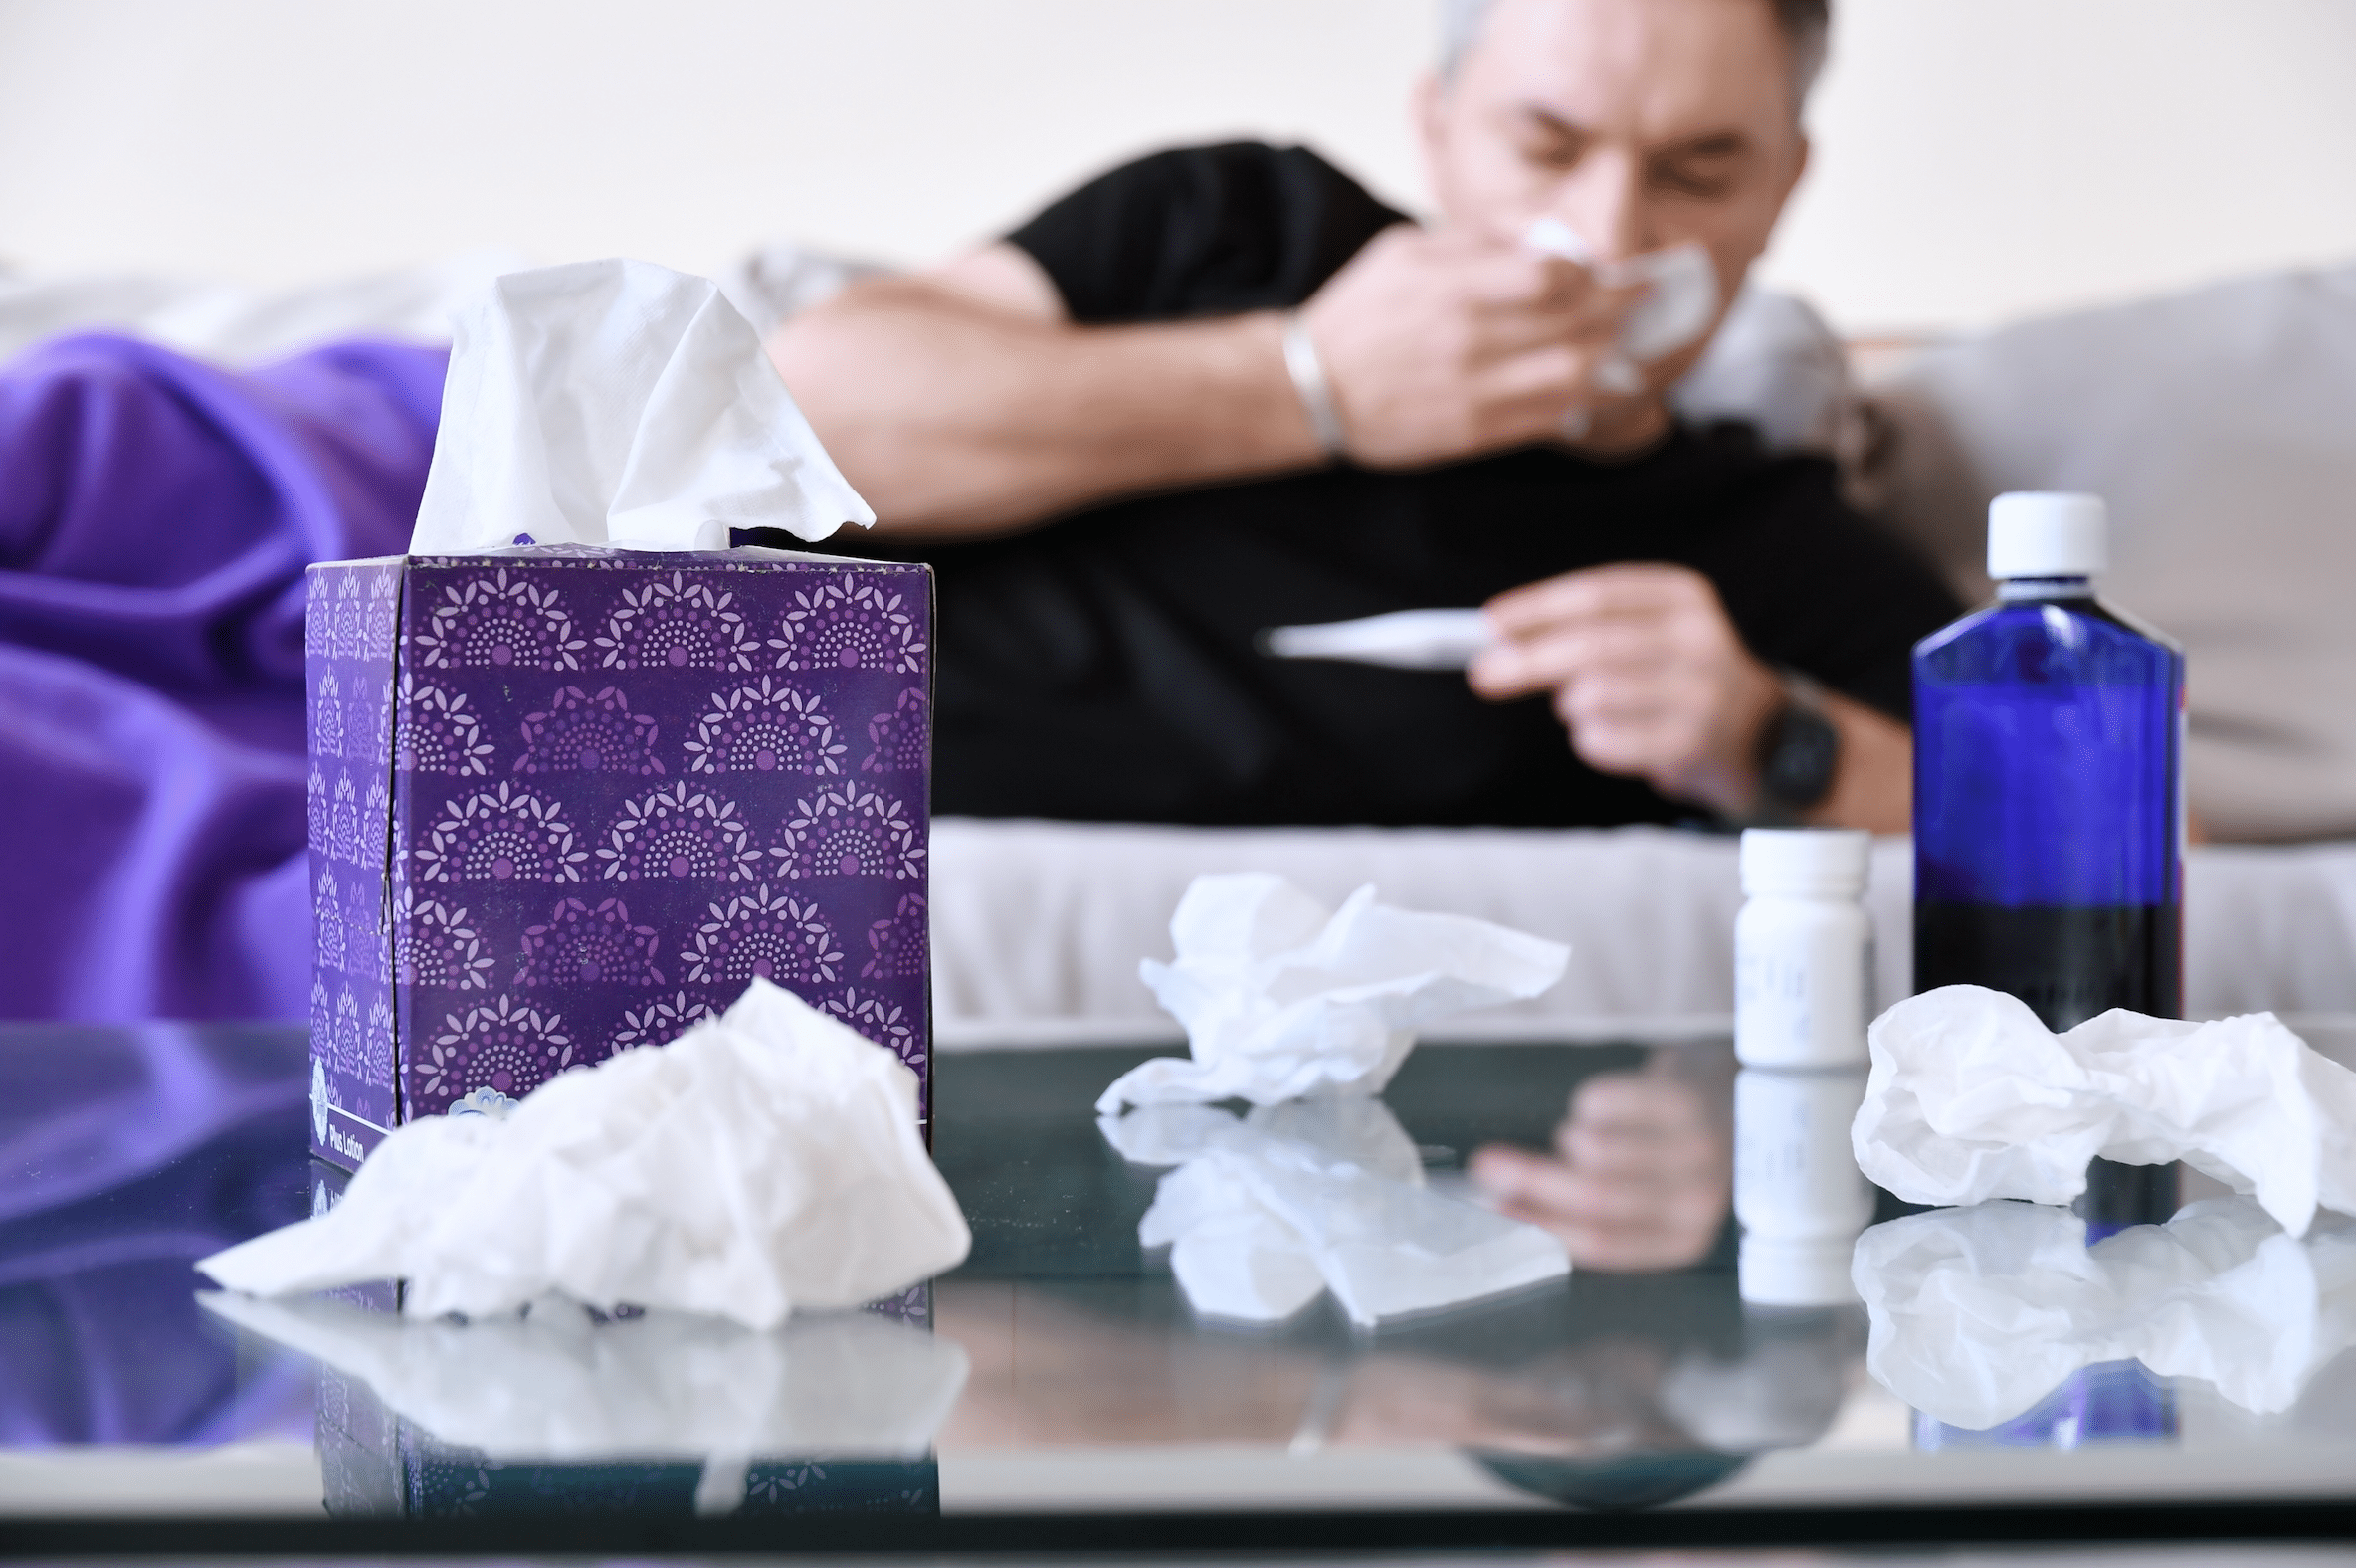 How to take care of your boyfriend or husband when he’s sick